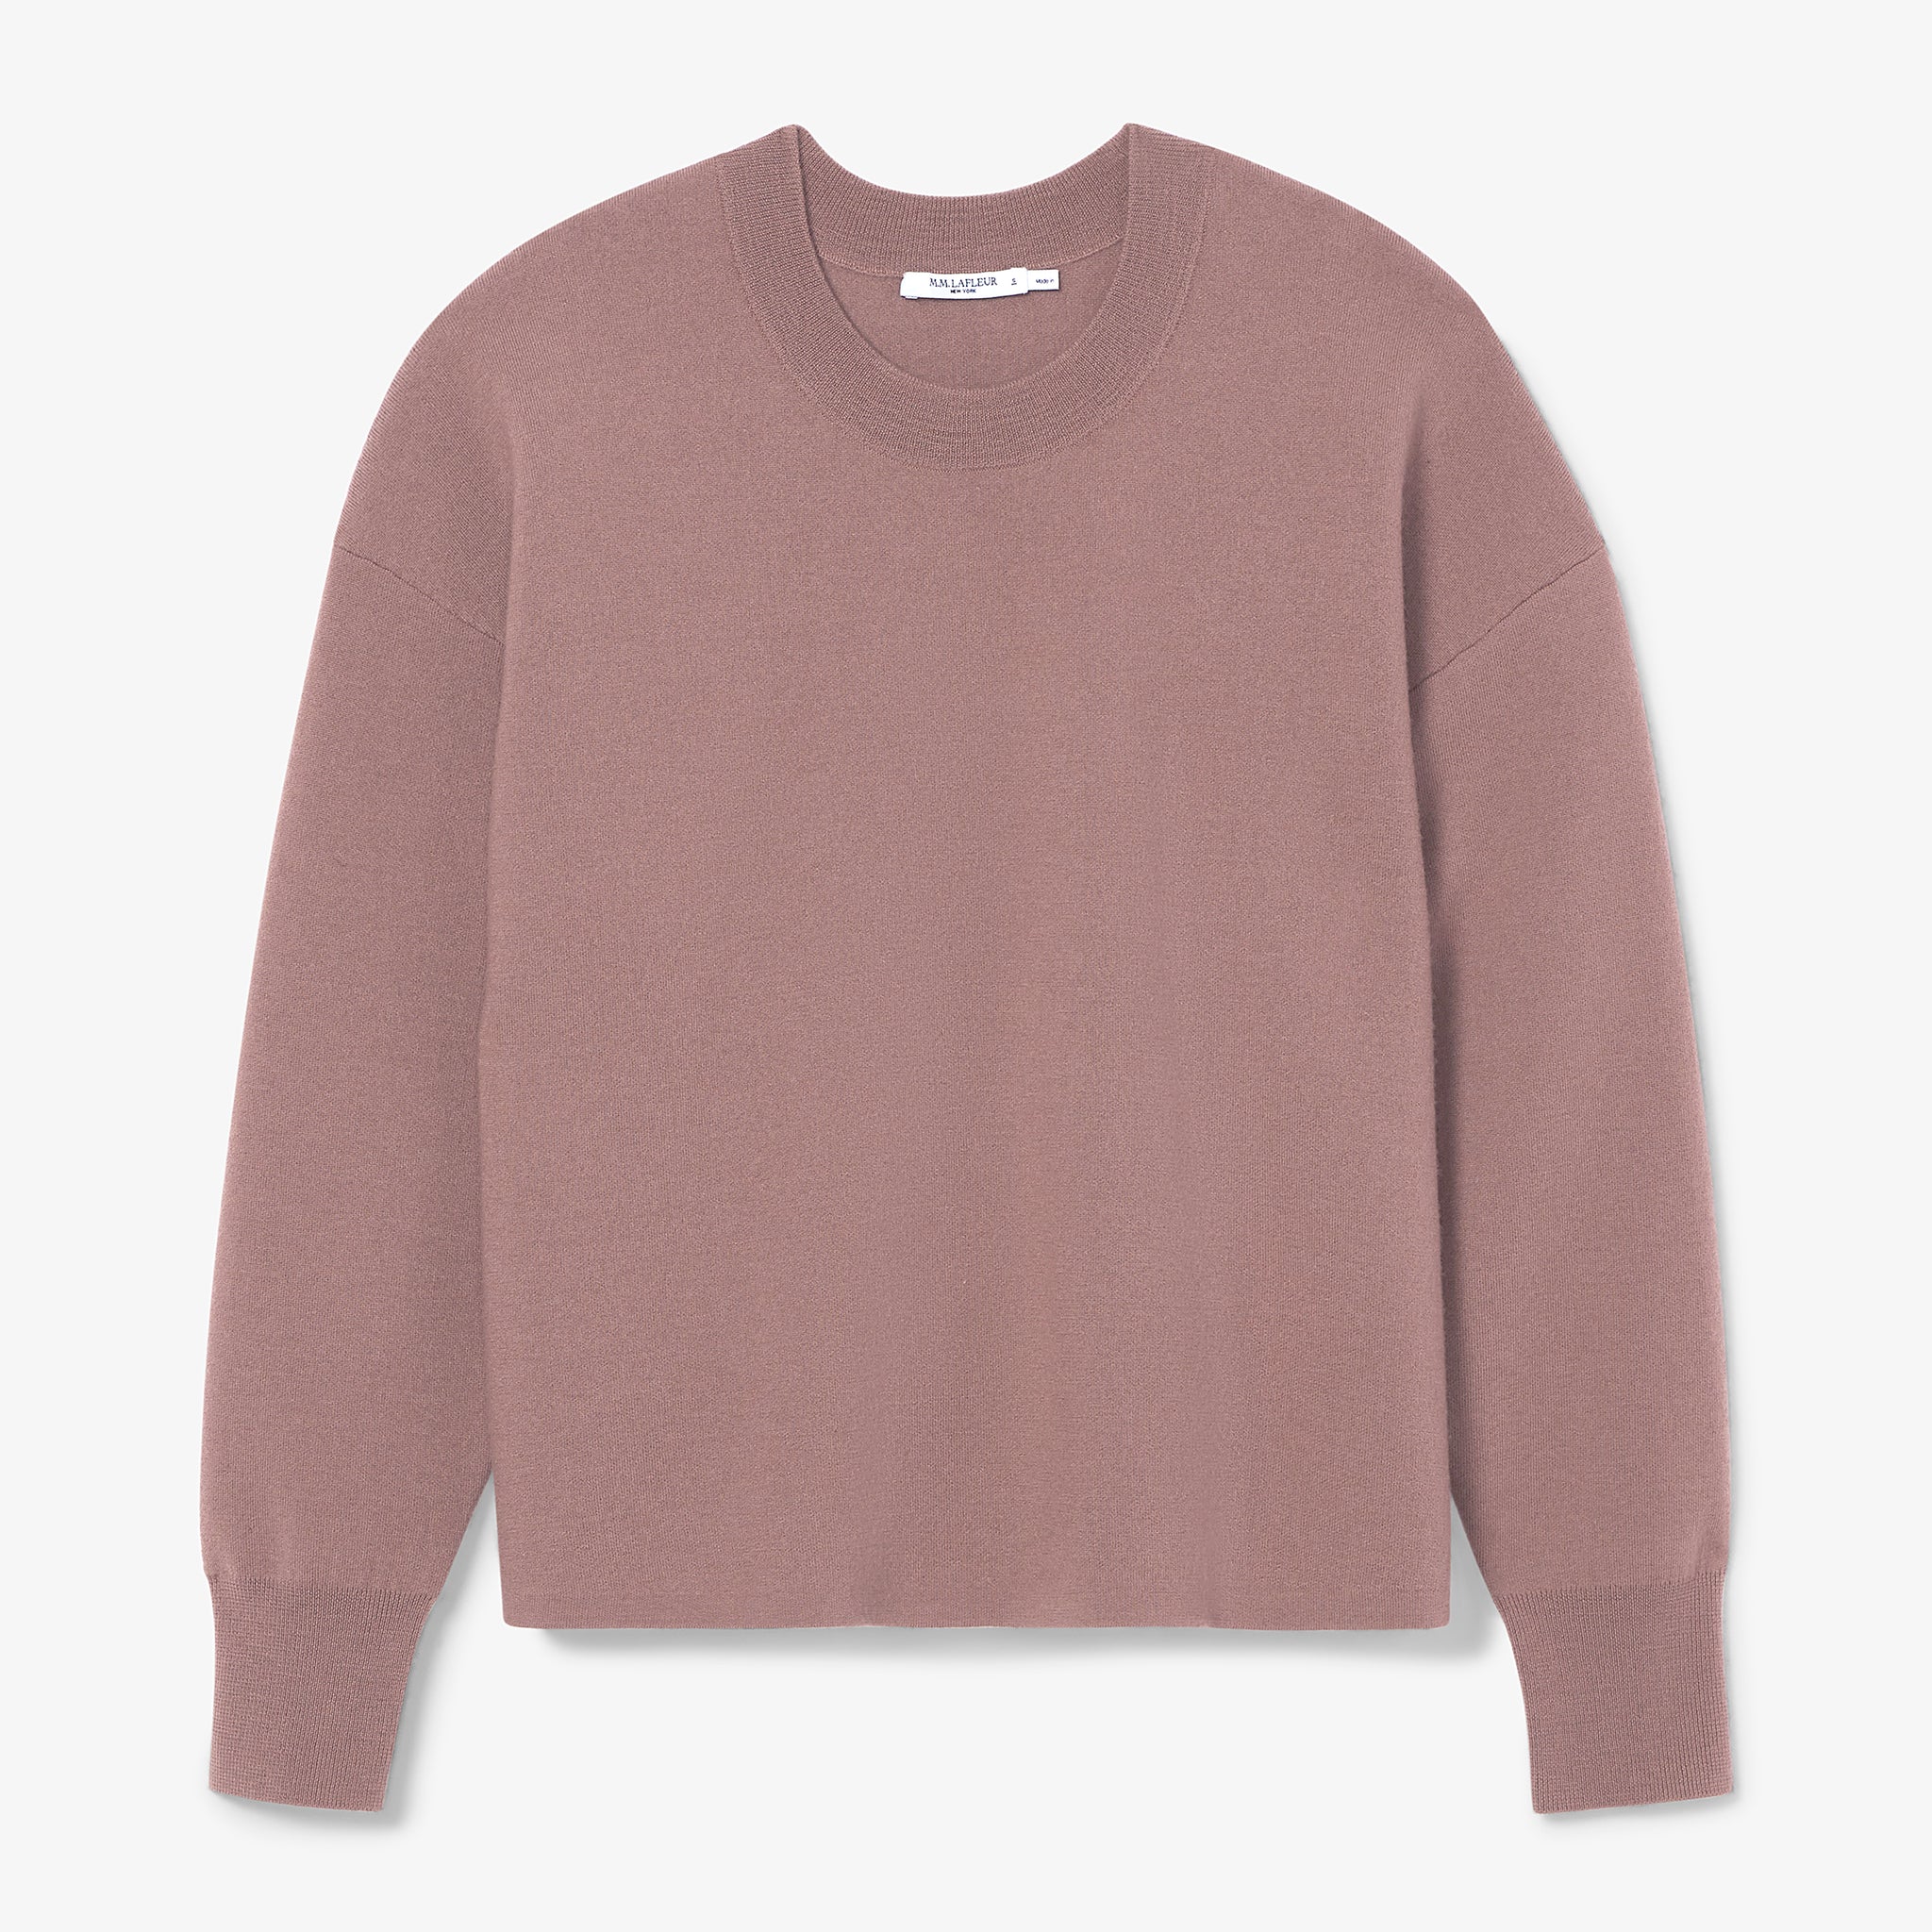 Packshot image of the quincy sweater in rose taupe